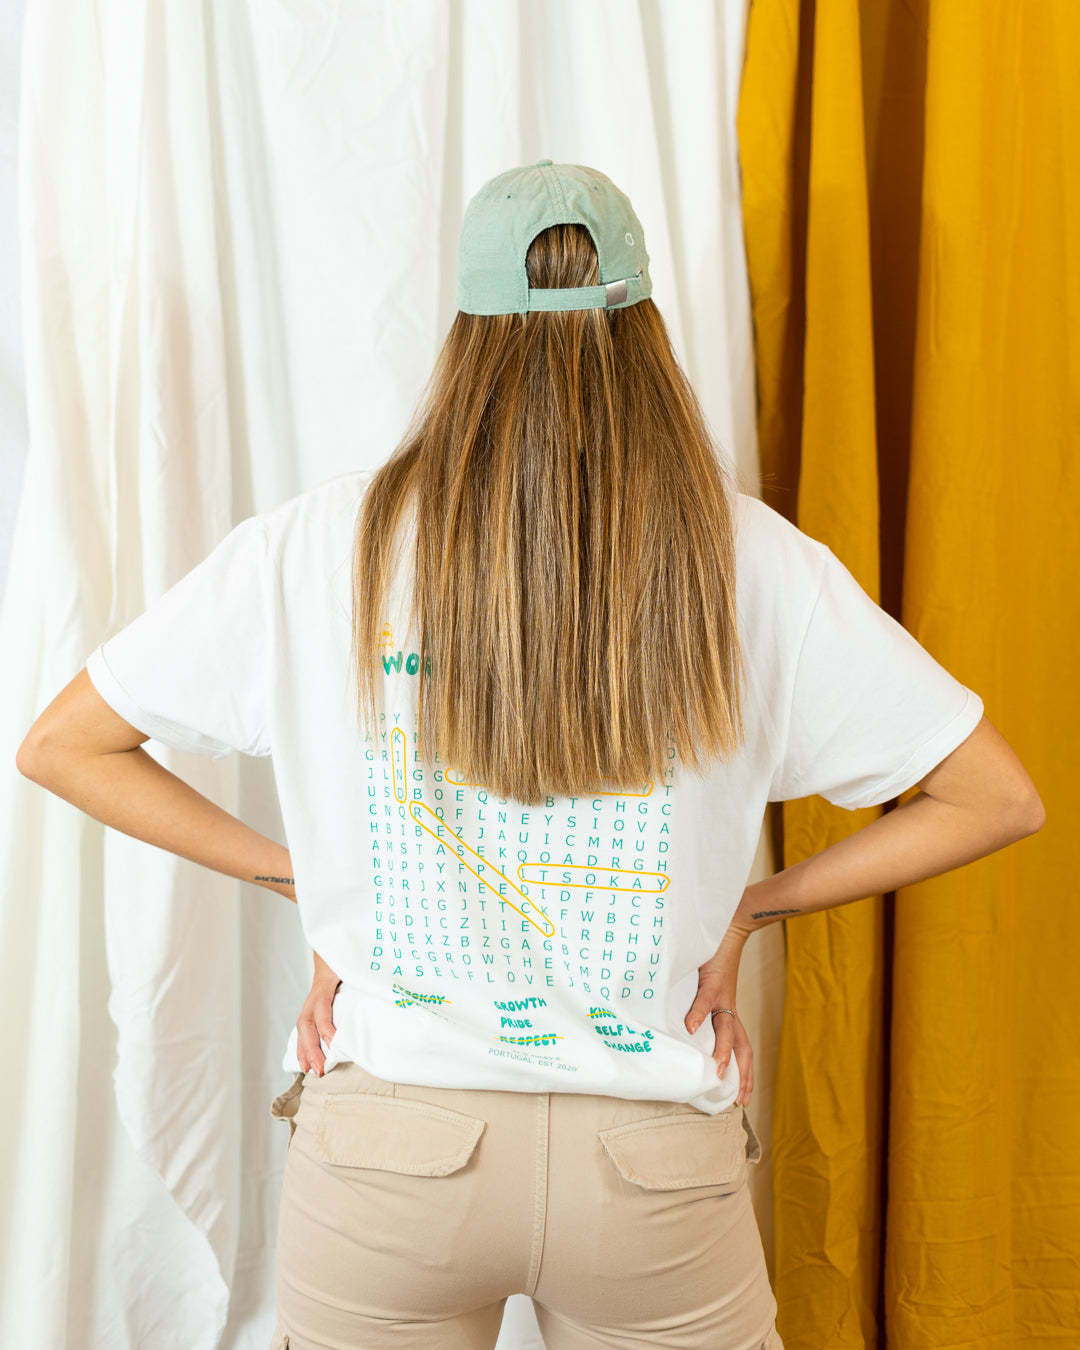 Wave cap | cotton needlecord corduroy in sage. Embroidered in Portugal. One size fits most | Wear it with pride. It's okay to be exactly who you are. Pt: Boné algodão de pala em bombazine de cor salvia, tamanha ajustável.  Image: long hair woman standing up with words search organic t-shirt and wave cap form it's okay. 